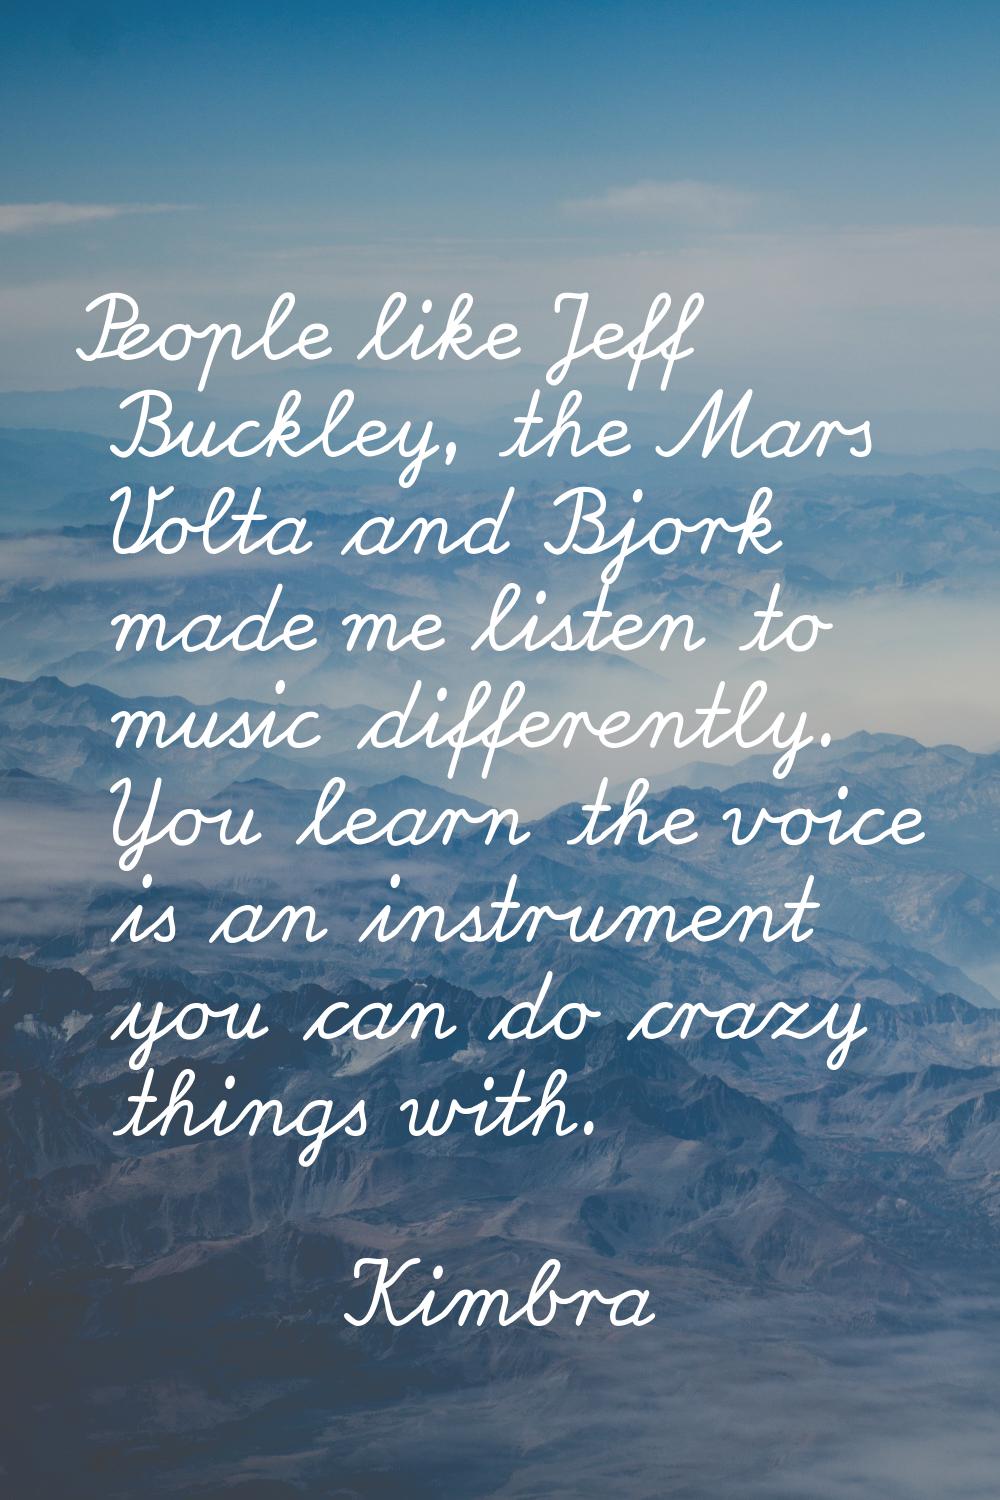 People like Jeff Buckley, the Mars Volta and Bjork made me listen to music differently. You learn t